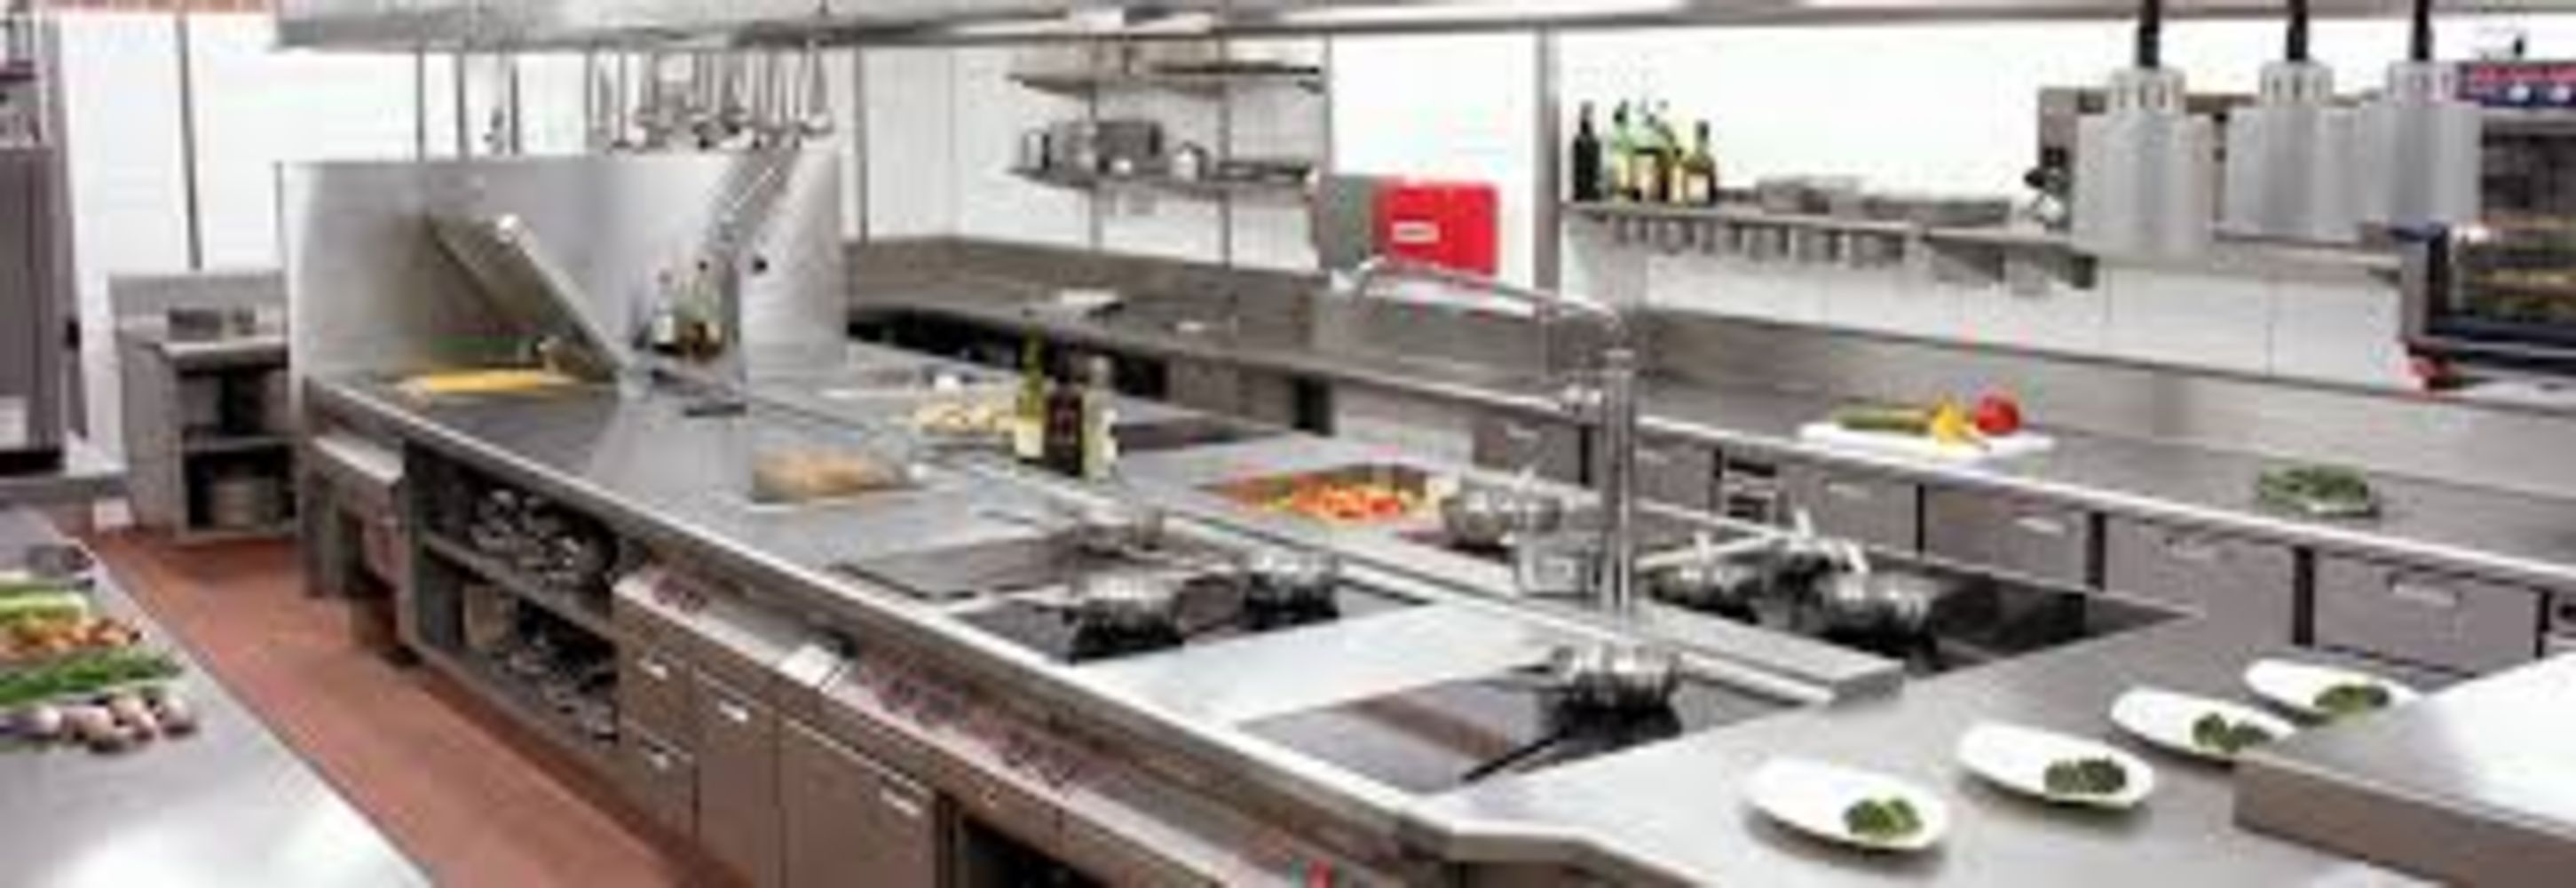 Huge General Collective Auction - Includes Catering Equipment, Hotel Furniture, Shop Fittings, Restaurant Equipment & More!